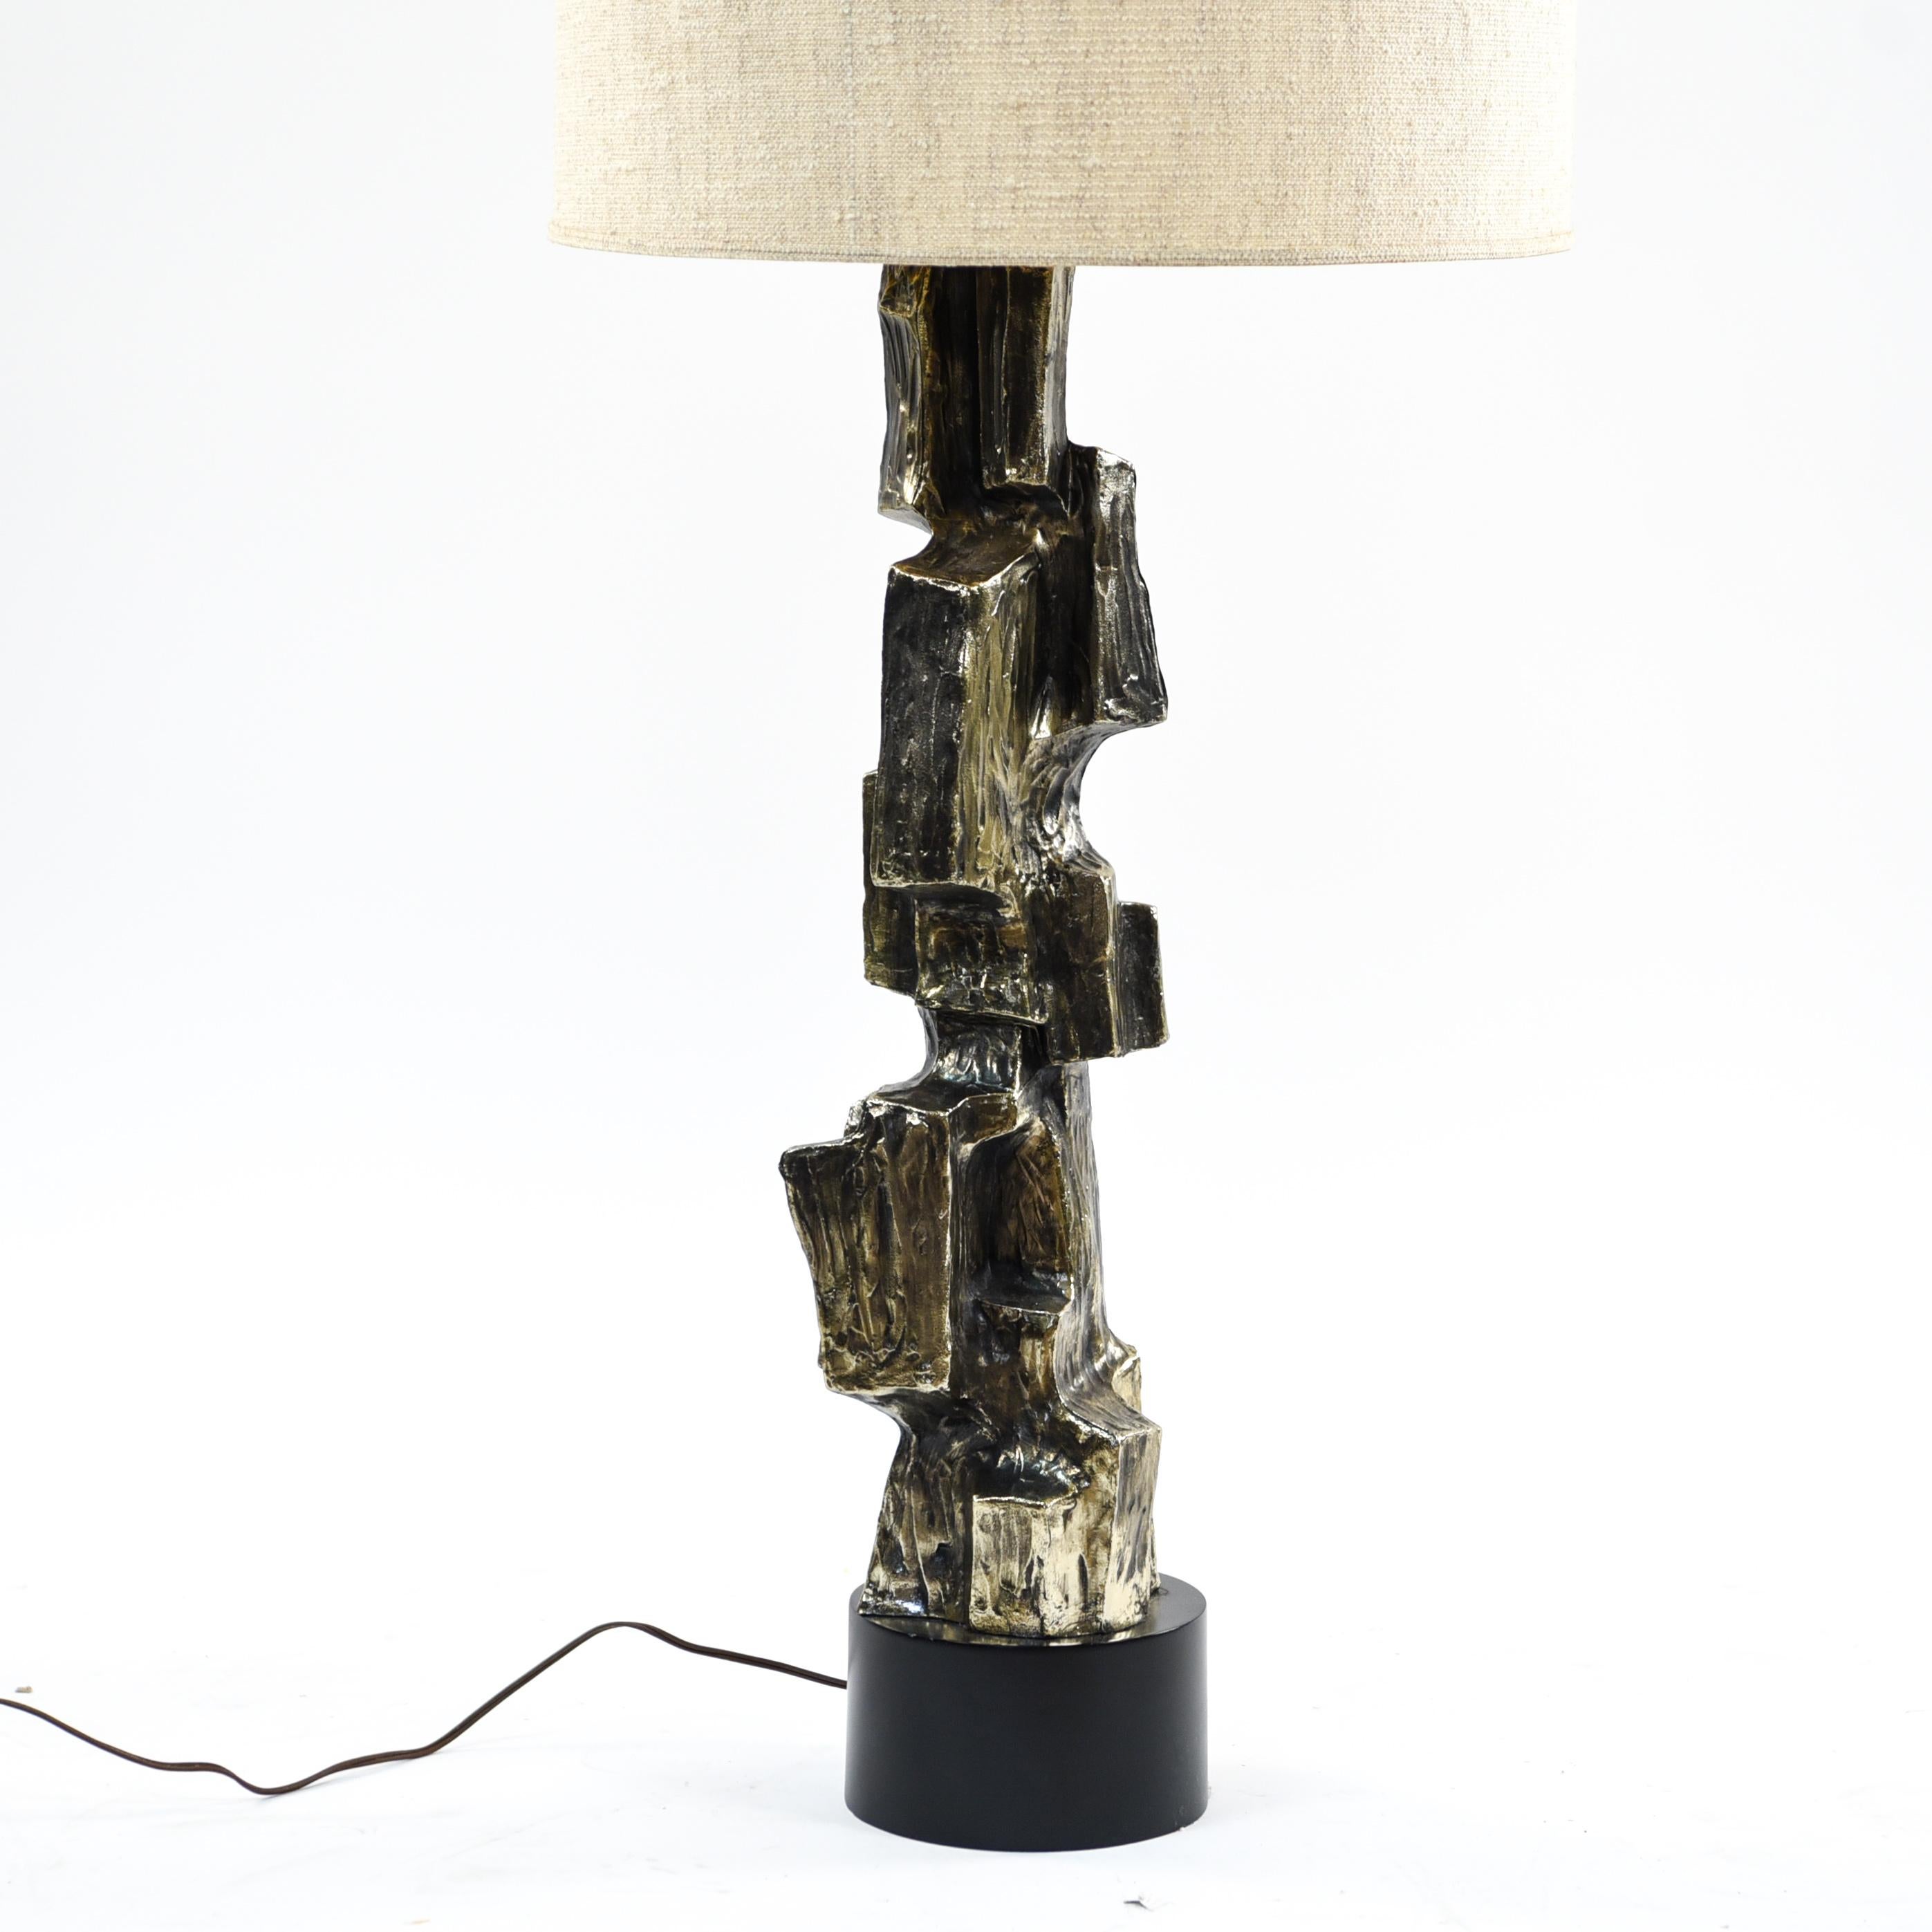 A tall sculptural metal lamp base finished in bronze patina over textural cast metal body. Manufactured by Laurel Lamp Company, 1970s. With a midcentury shade.